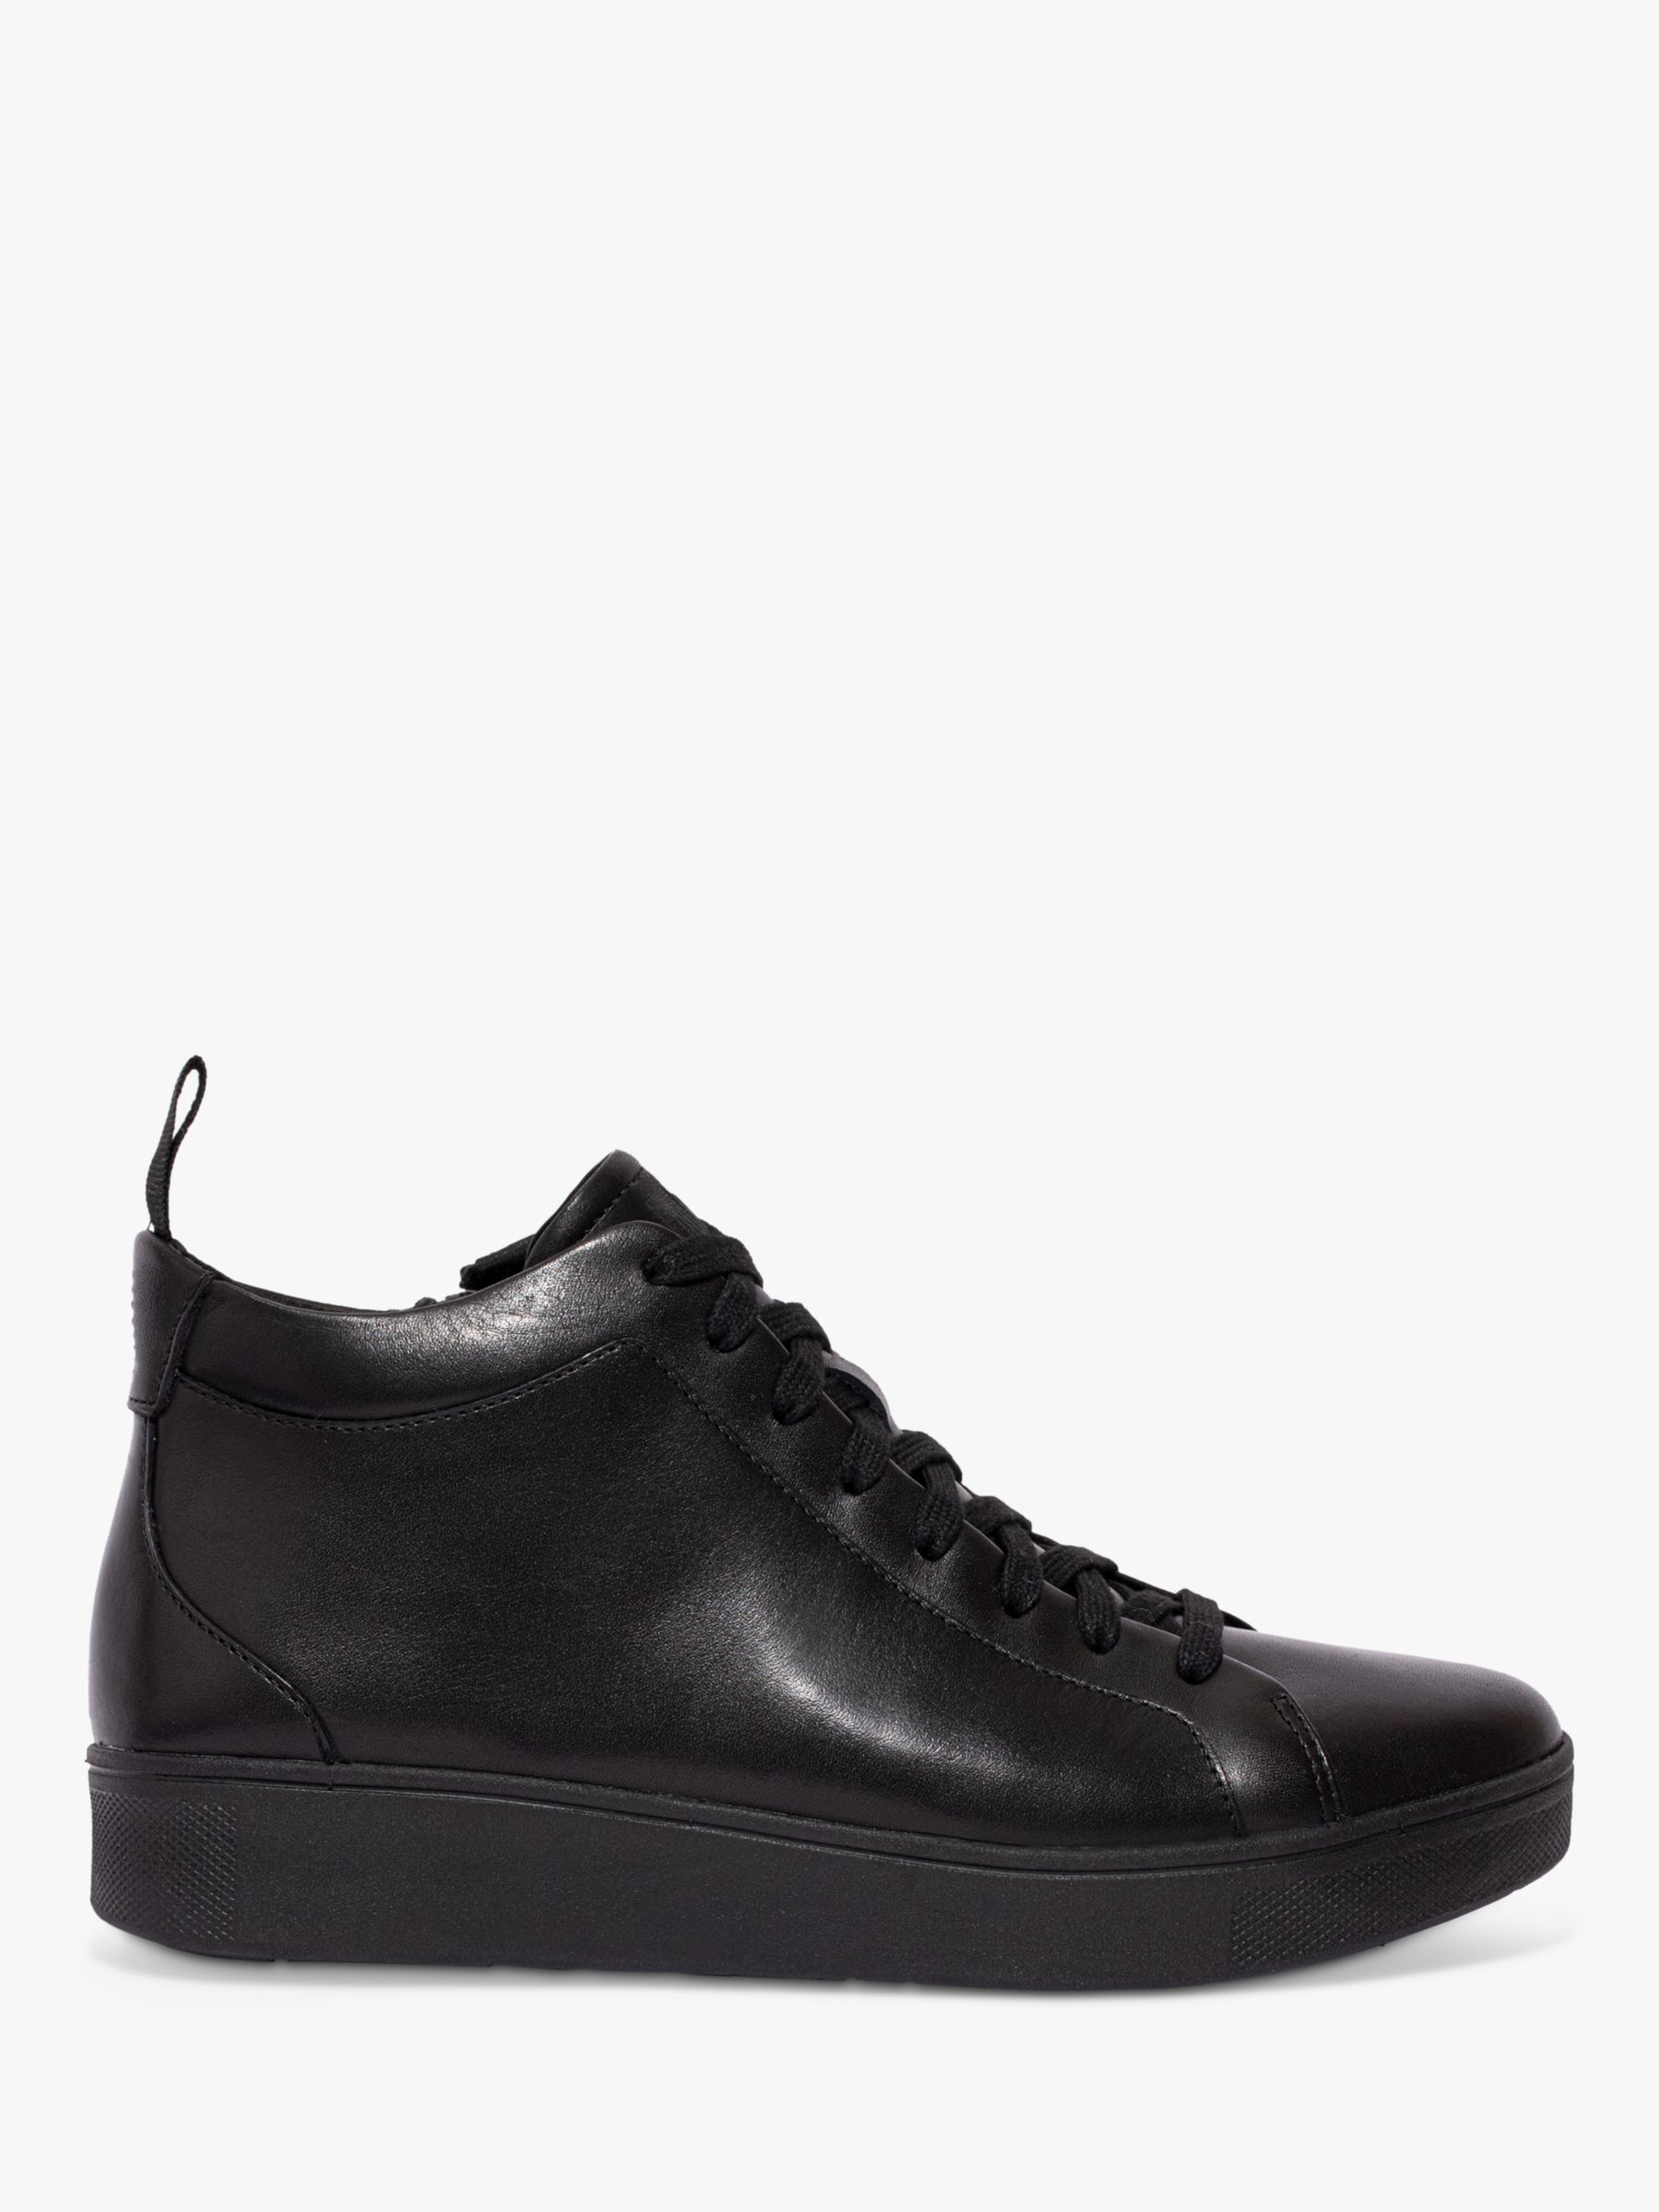 FitFlop Rally Leather Trainers, All Black at John Lewis & Partners